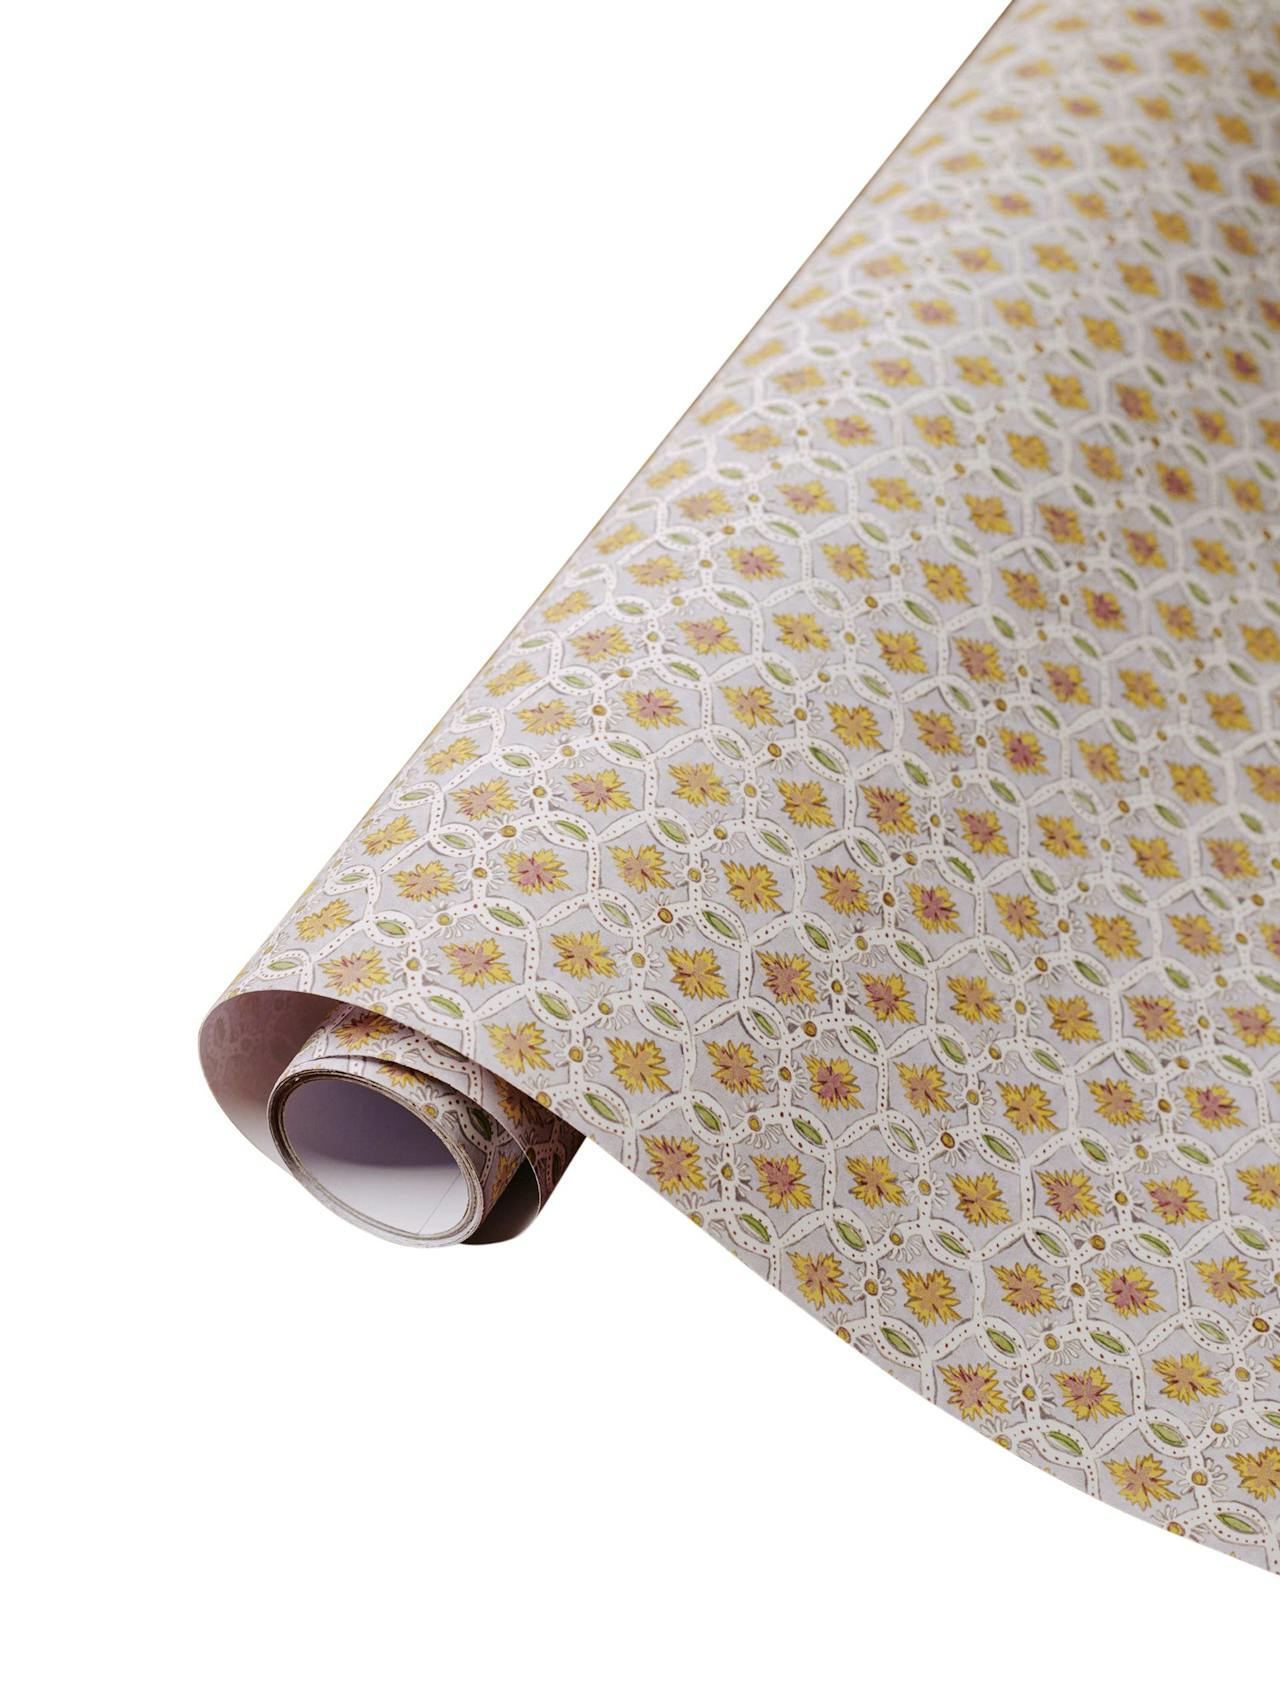 Neville Chain Spring Lilac gift wrap roll